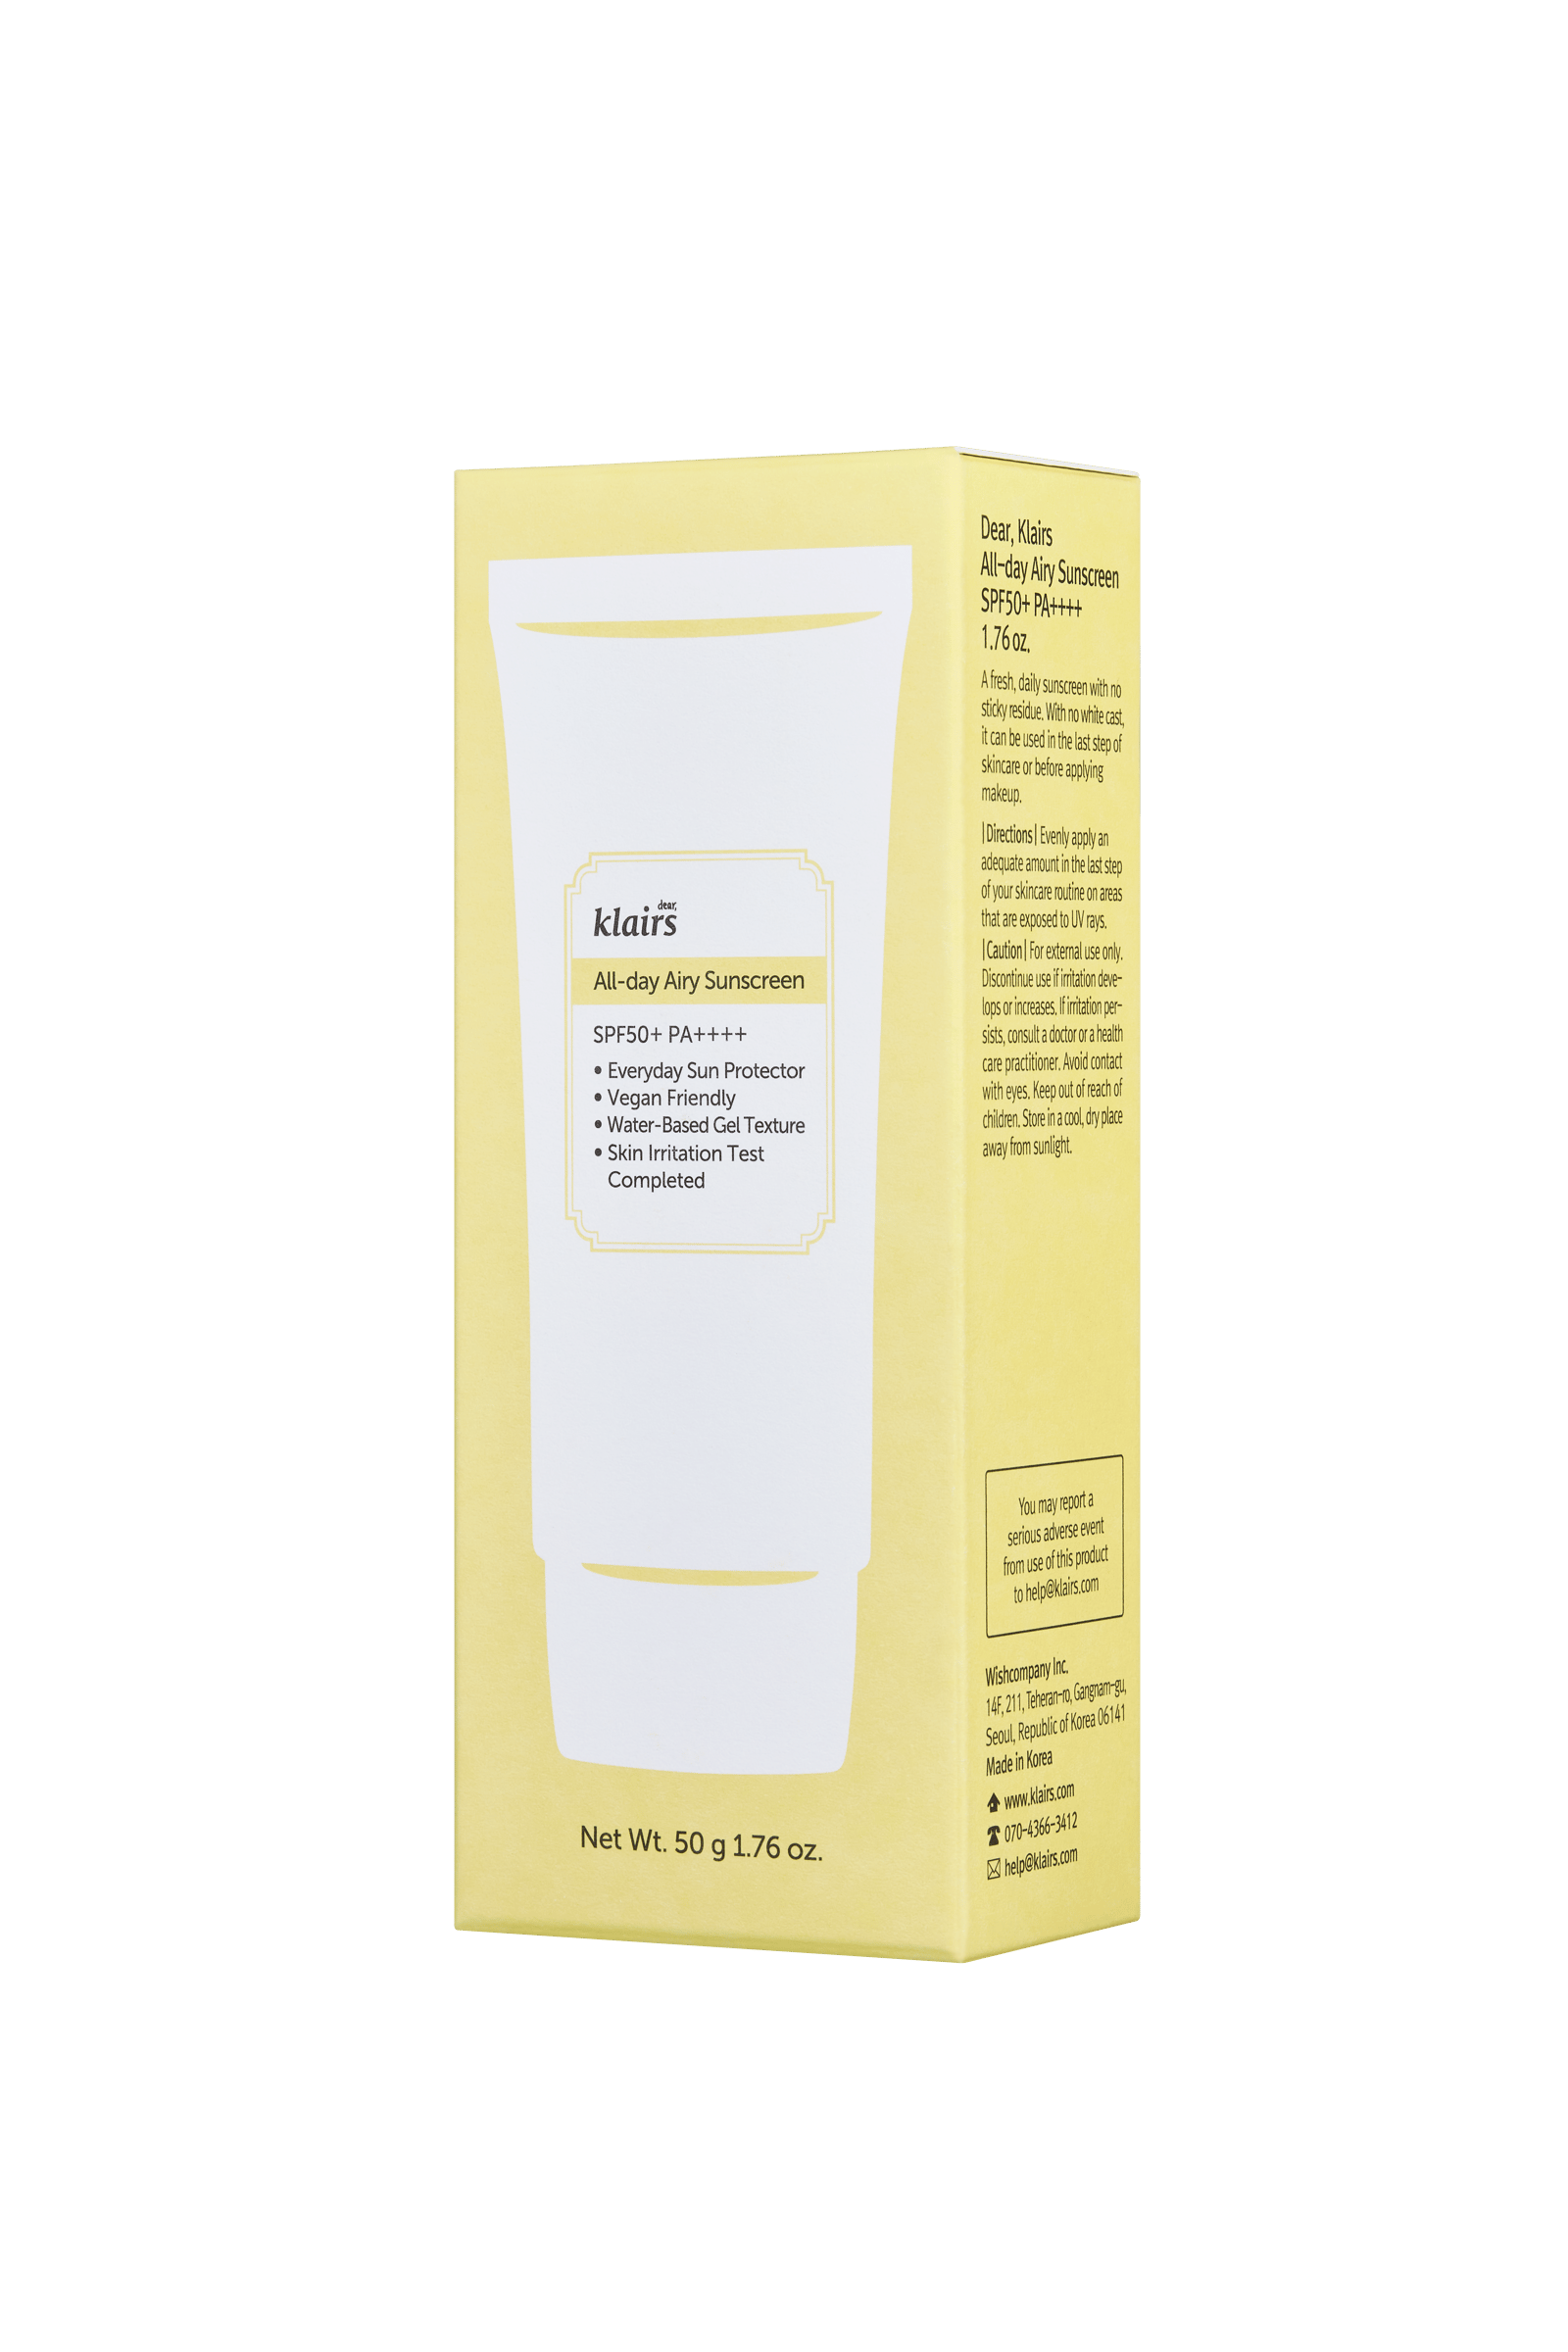 Klairs All-day Airy Sunscreen 50 ml